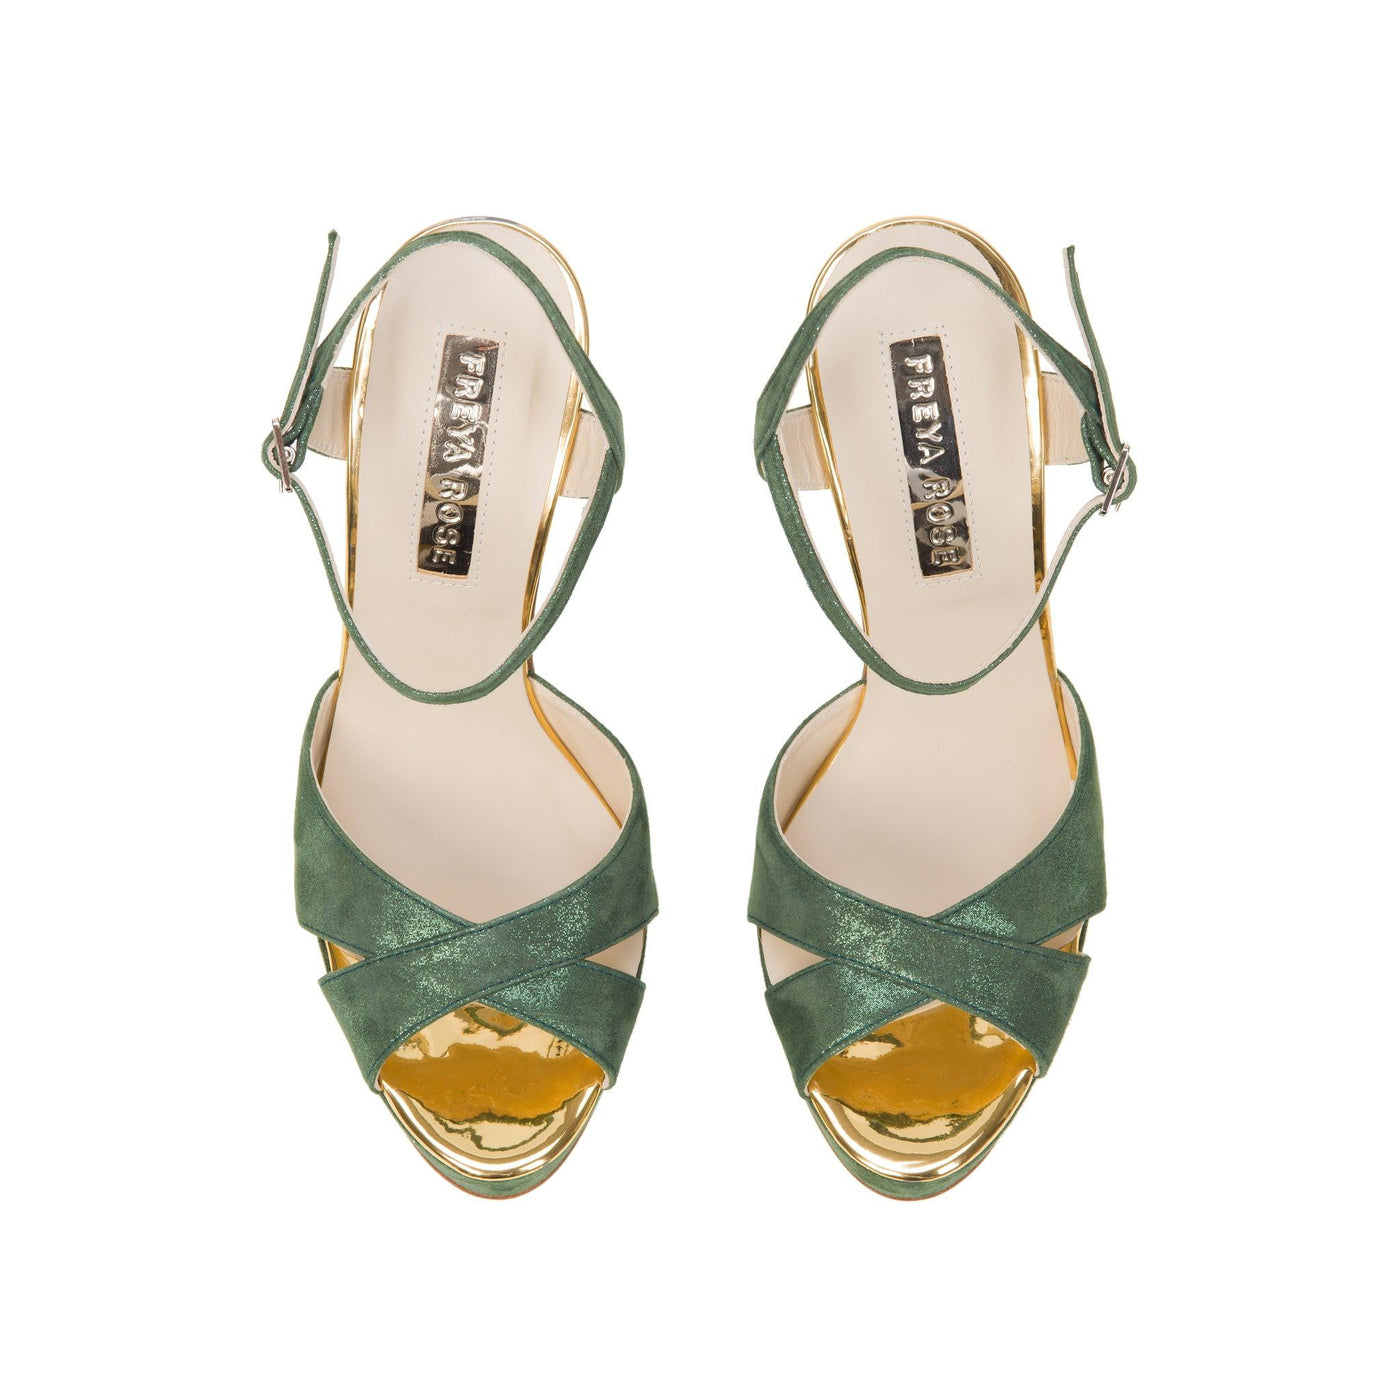 Product photo of top view of 'Cher Verde' Couture designer green womens shoes with pearl heel by Freya Rose London